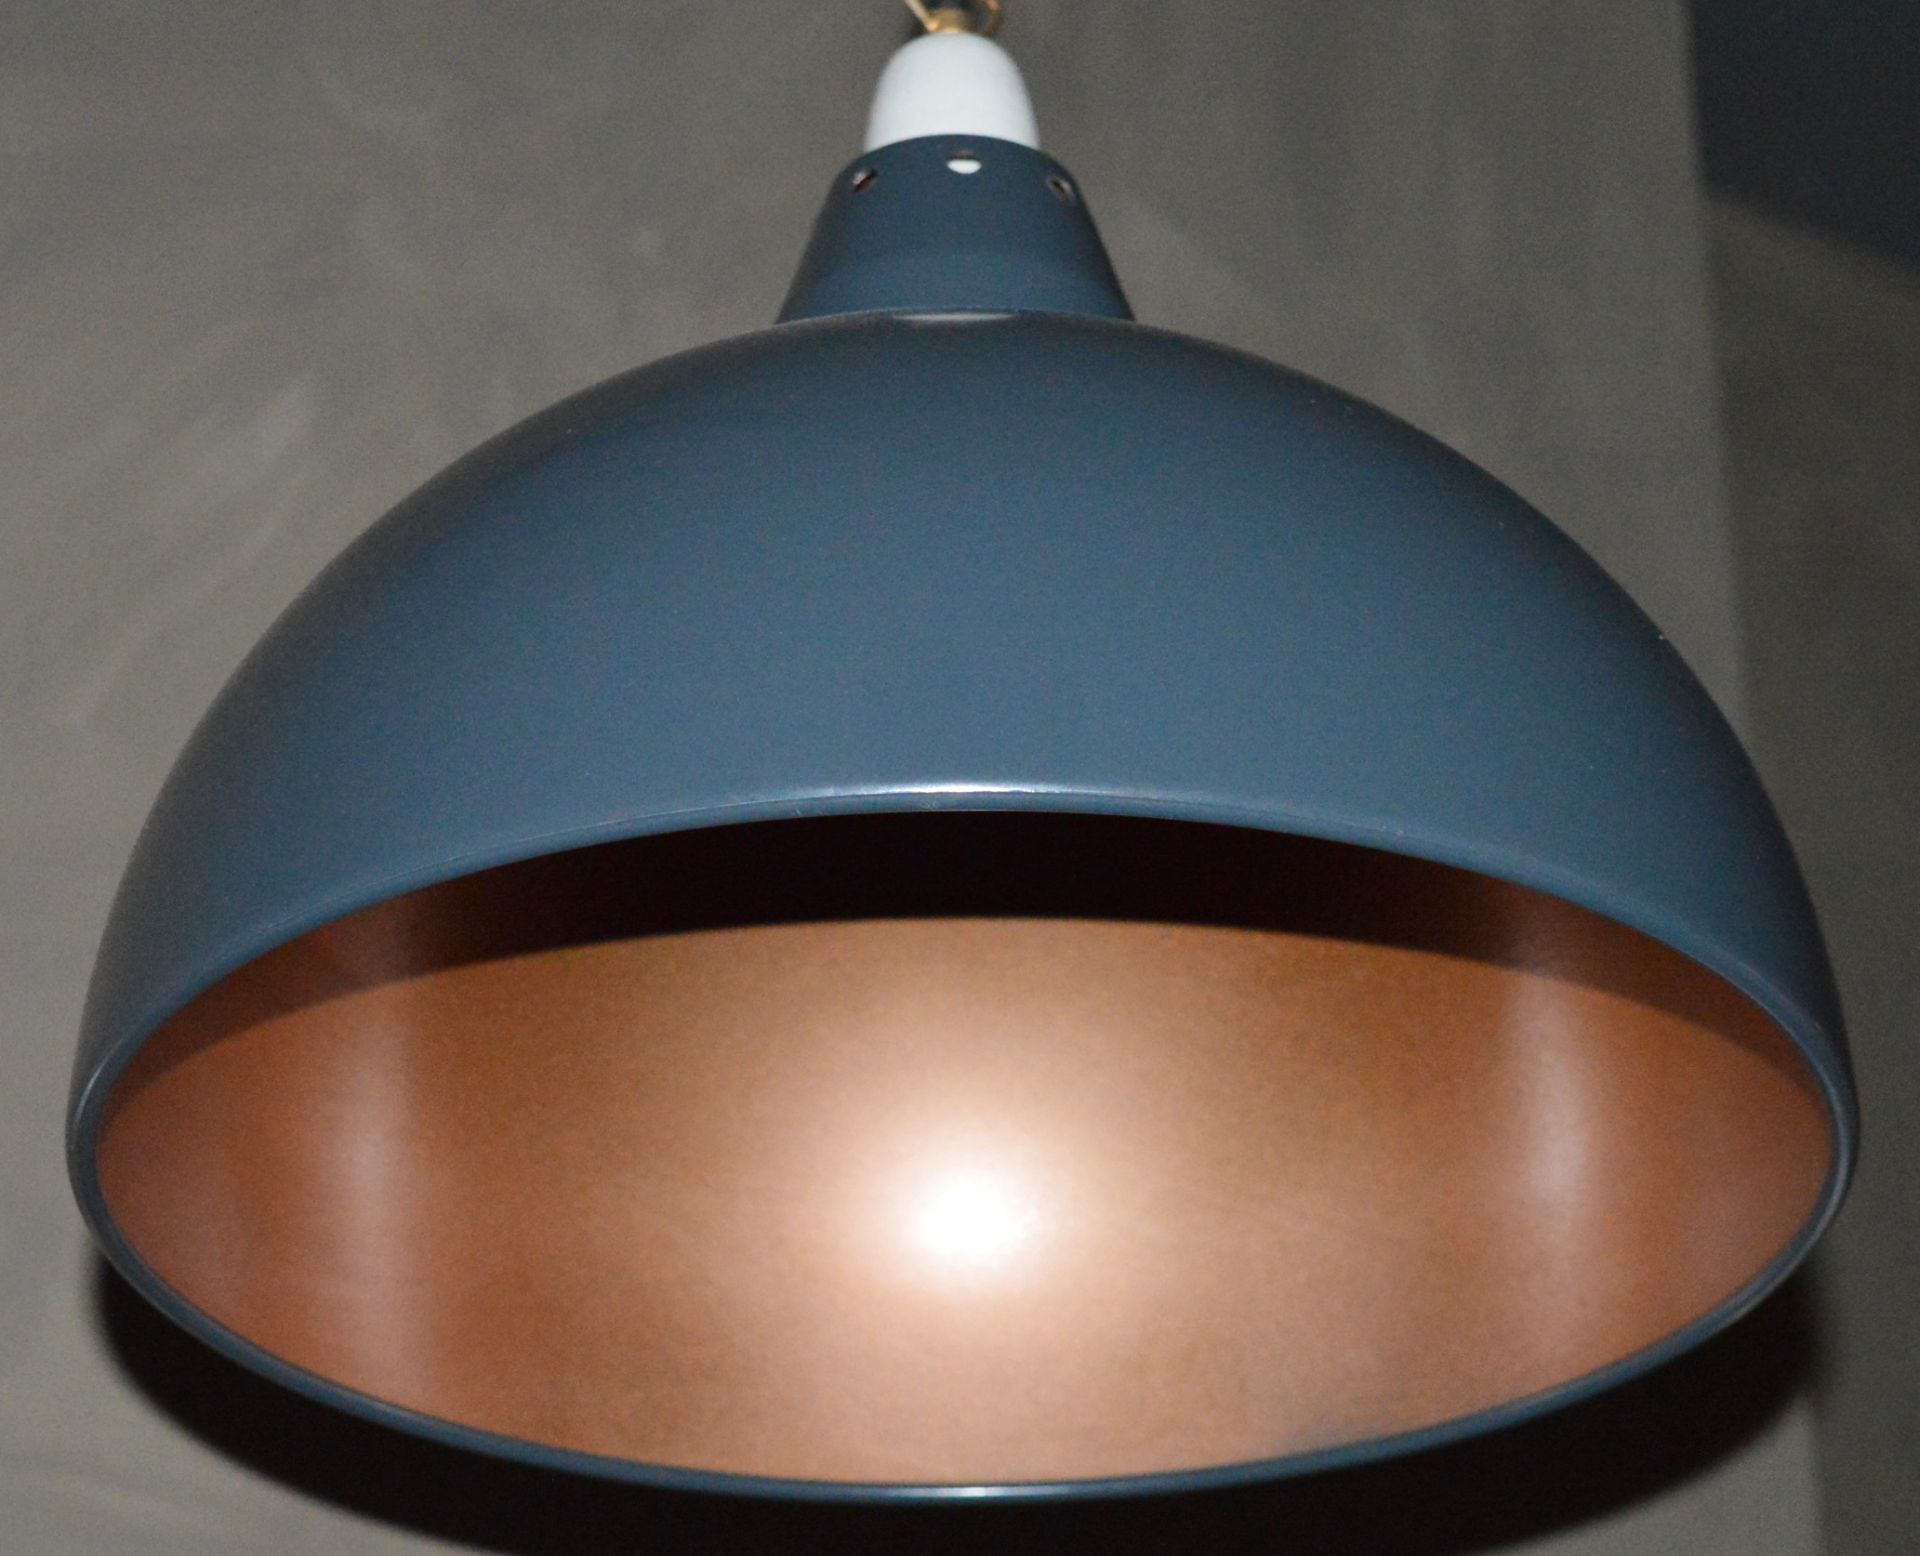 2 x Dome Pendant Ceiling Light Fittings - Grey Dome and Copper - Vintage Style - 40cm Diameter - - Image 2 of 2